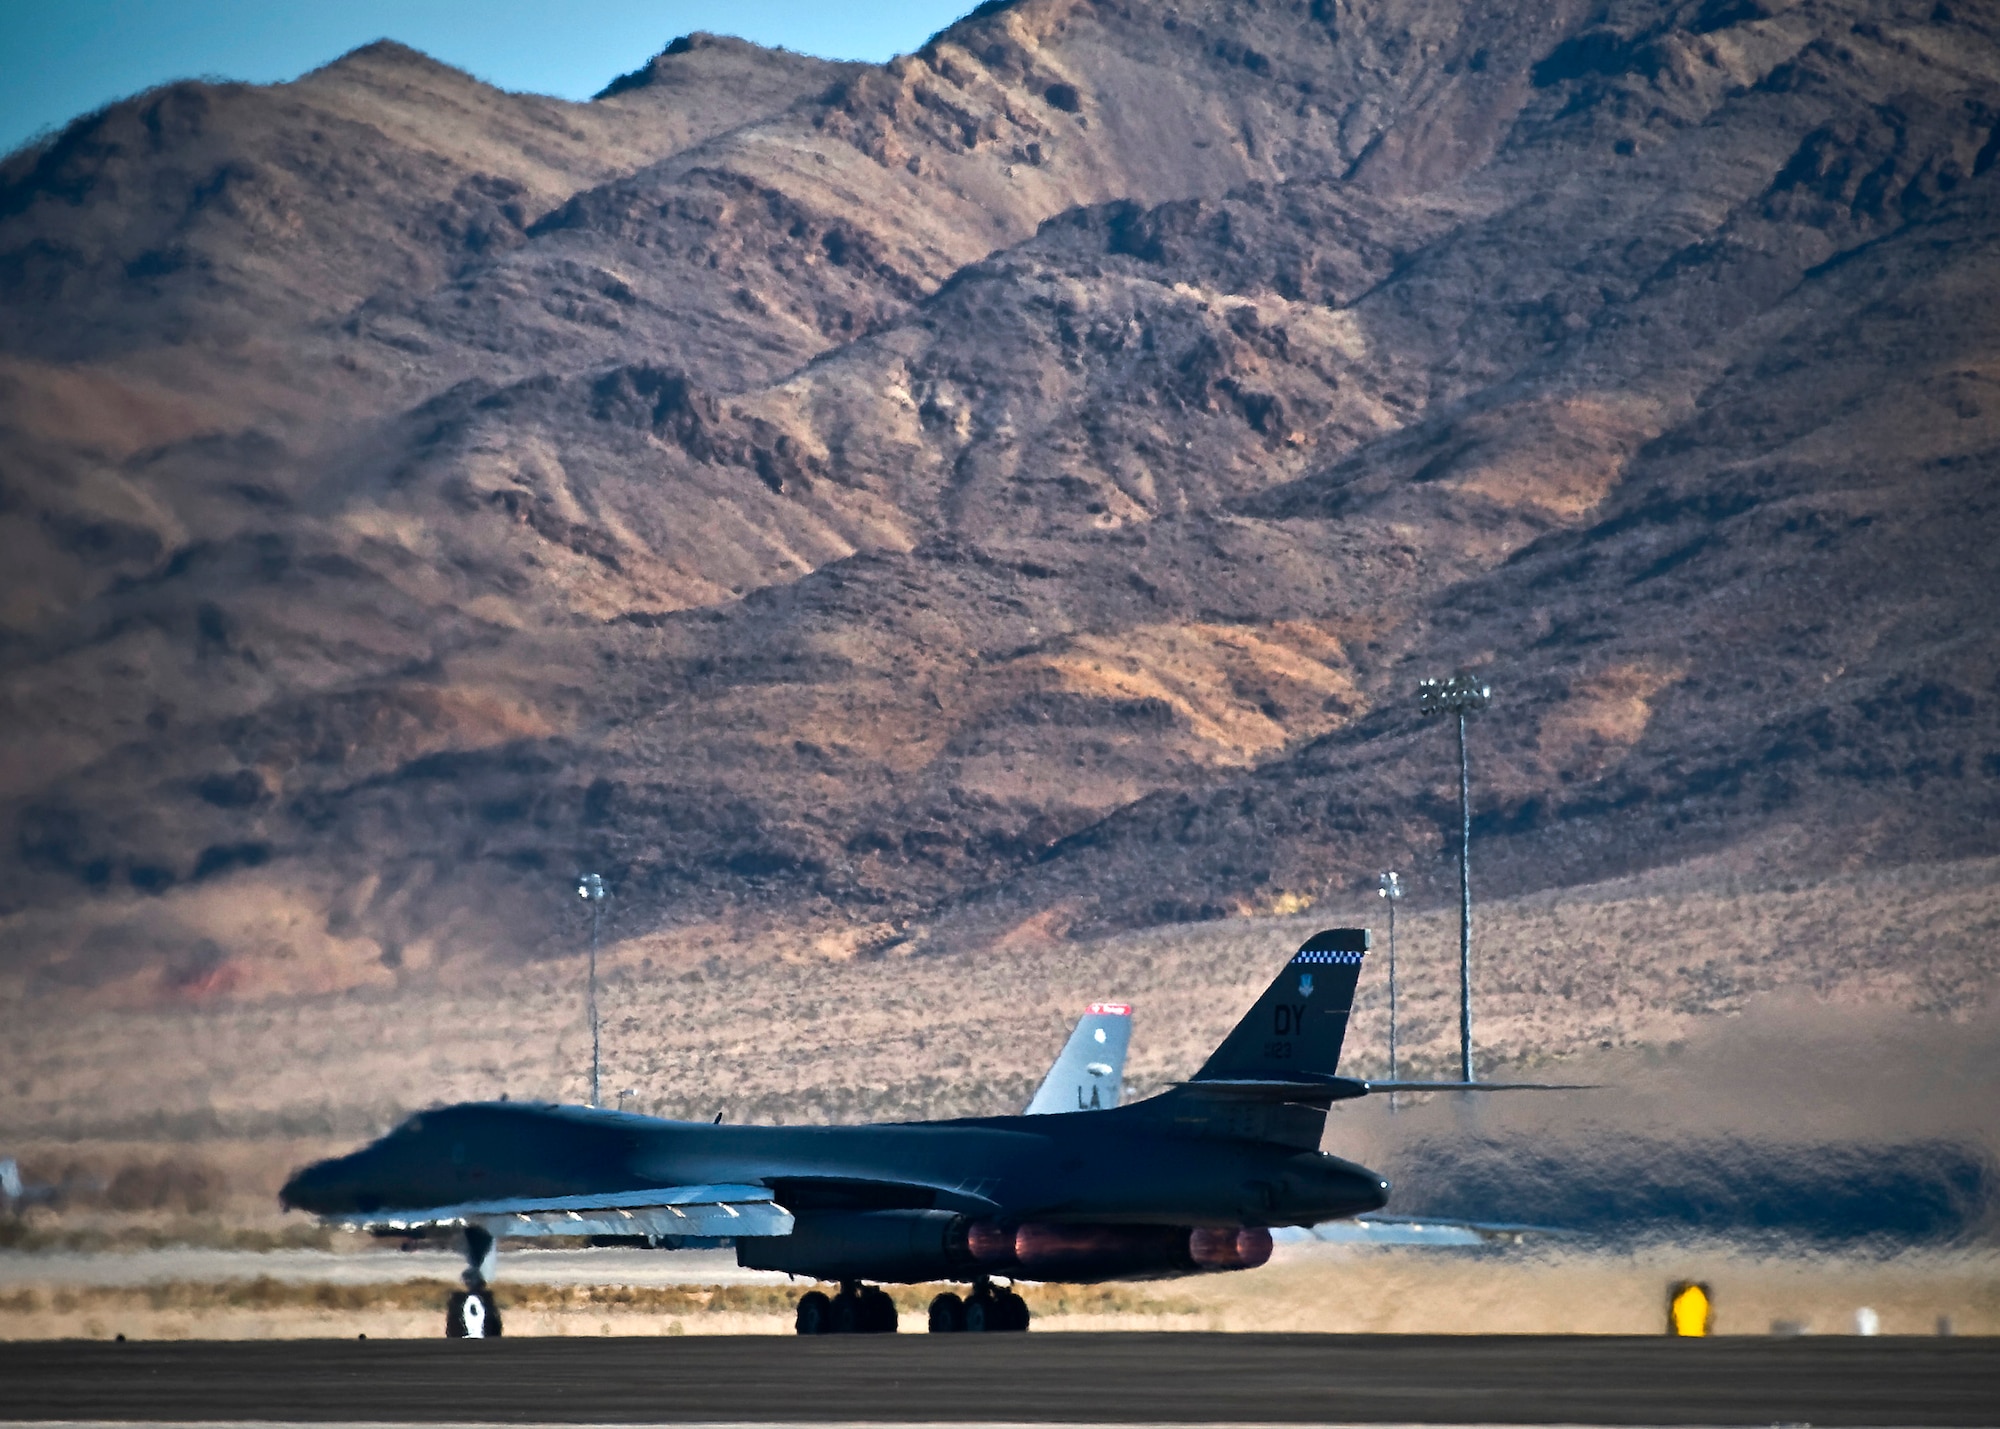 A U.S. Air Force B-1B Lancer assigned to Dyess Air Force Base, Texas, departs for a training mission over the Nevada Test and Training Range during Red Flag 13-2, Jan. 22, 2013, at Nellis Air Force Base, Nev. The exercise is hosted north of Las Vegas on the Nevada Test and Training Range. (U.S. Air Force photo/Senior Airman Brett Clashman)